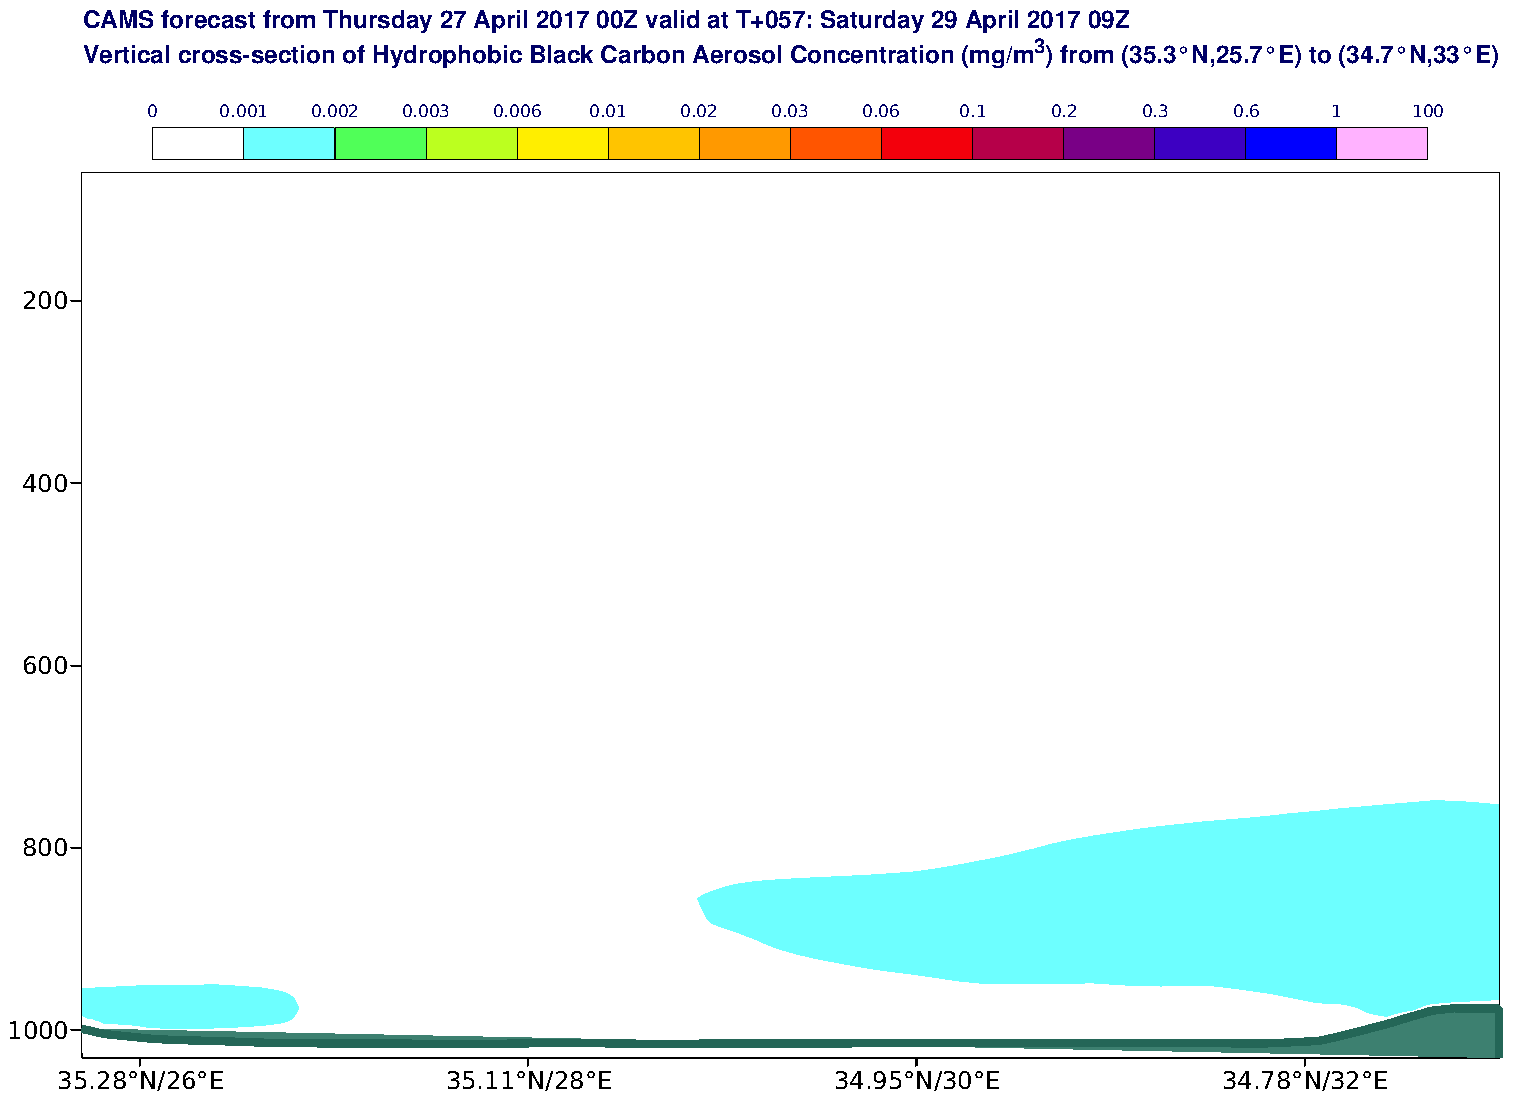 Vertical cross-section of Hydrophobic Black Carbon Aerosol Concentration (mg/m3) valid at T57 - 2017-04-29 09:00